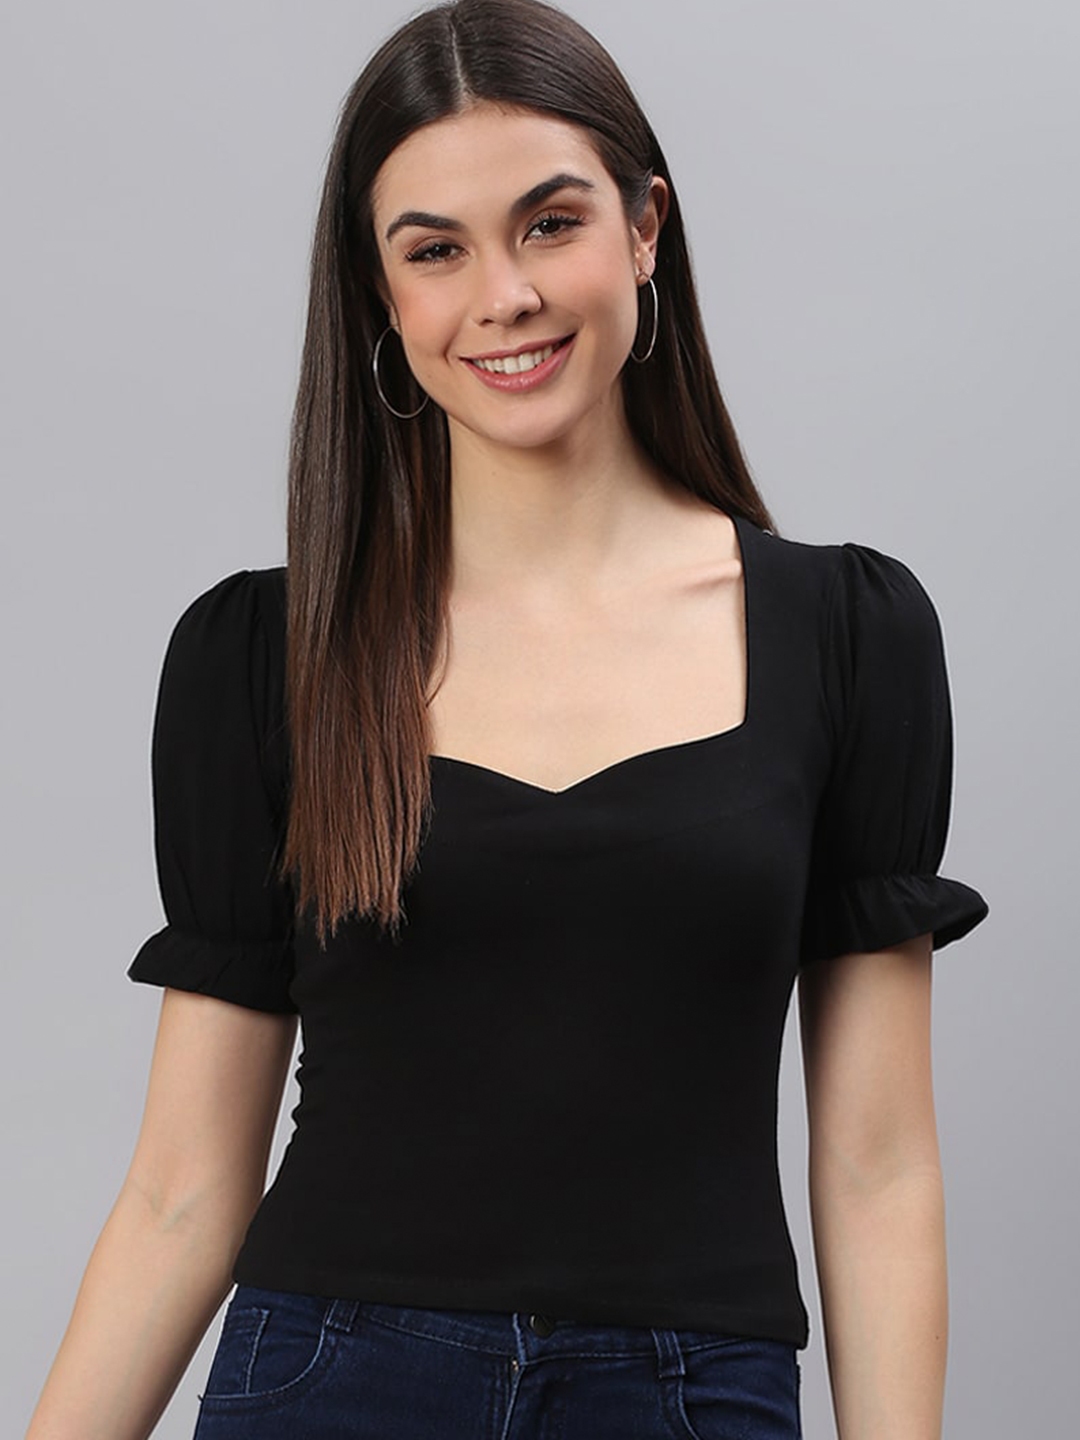 Buy Cation Black Sweetheart Neck Fitted Top - Tops for Women 14569914